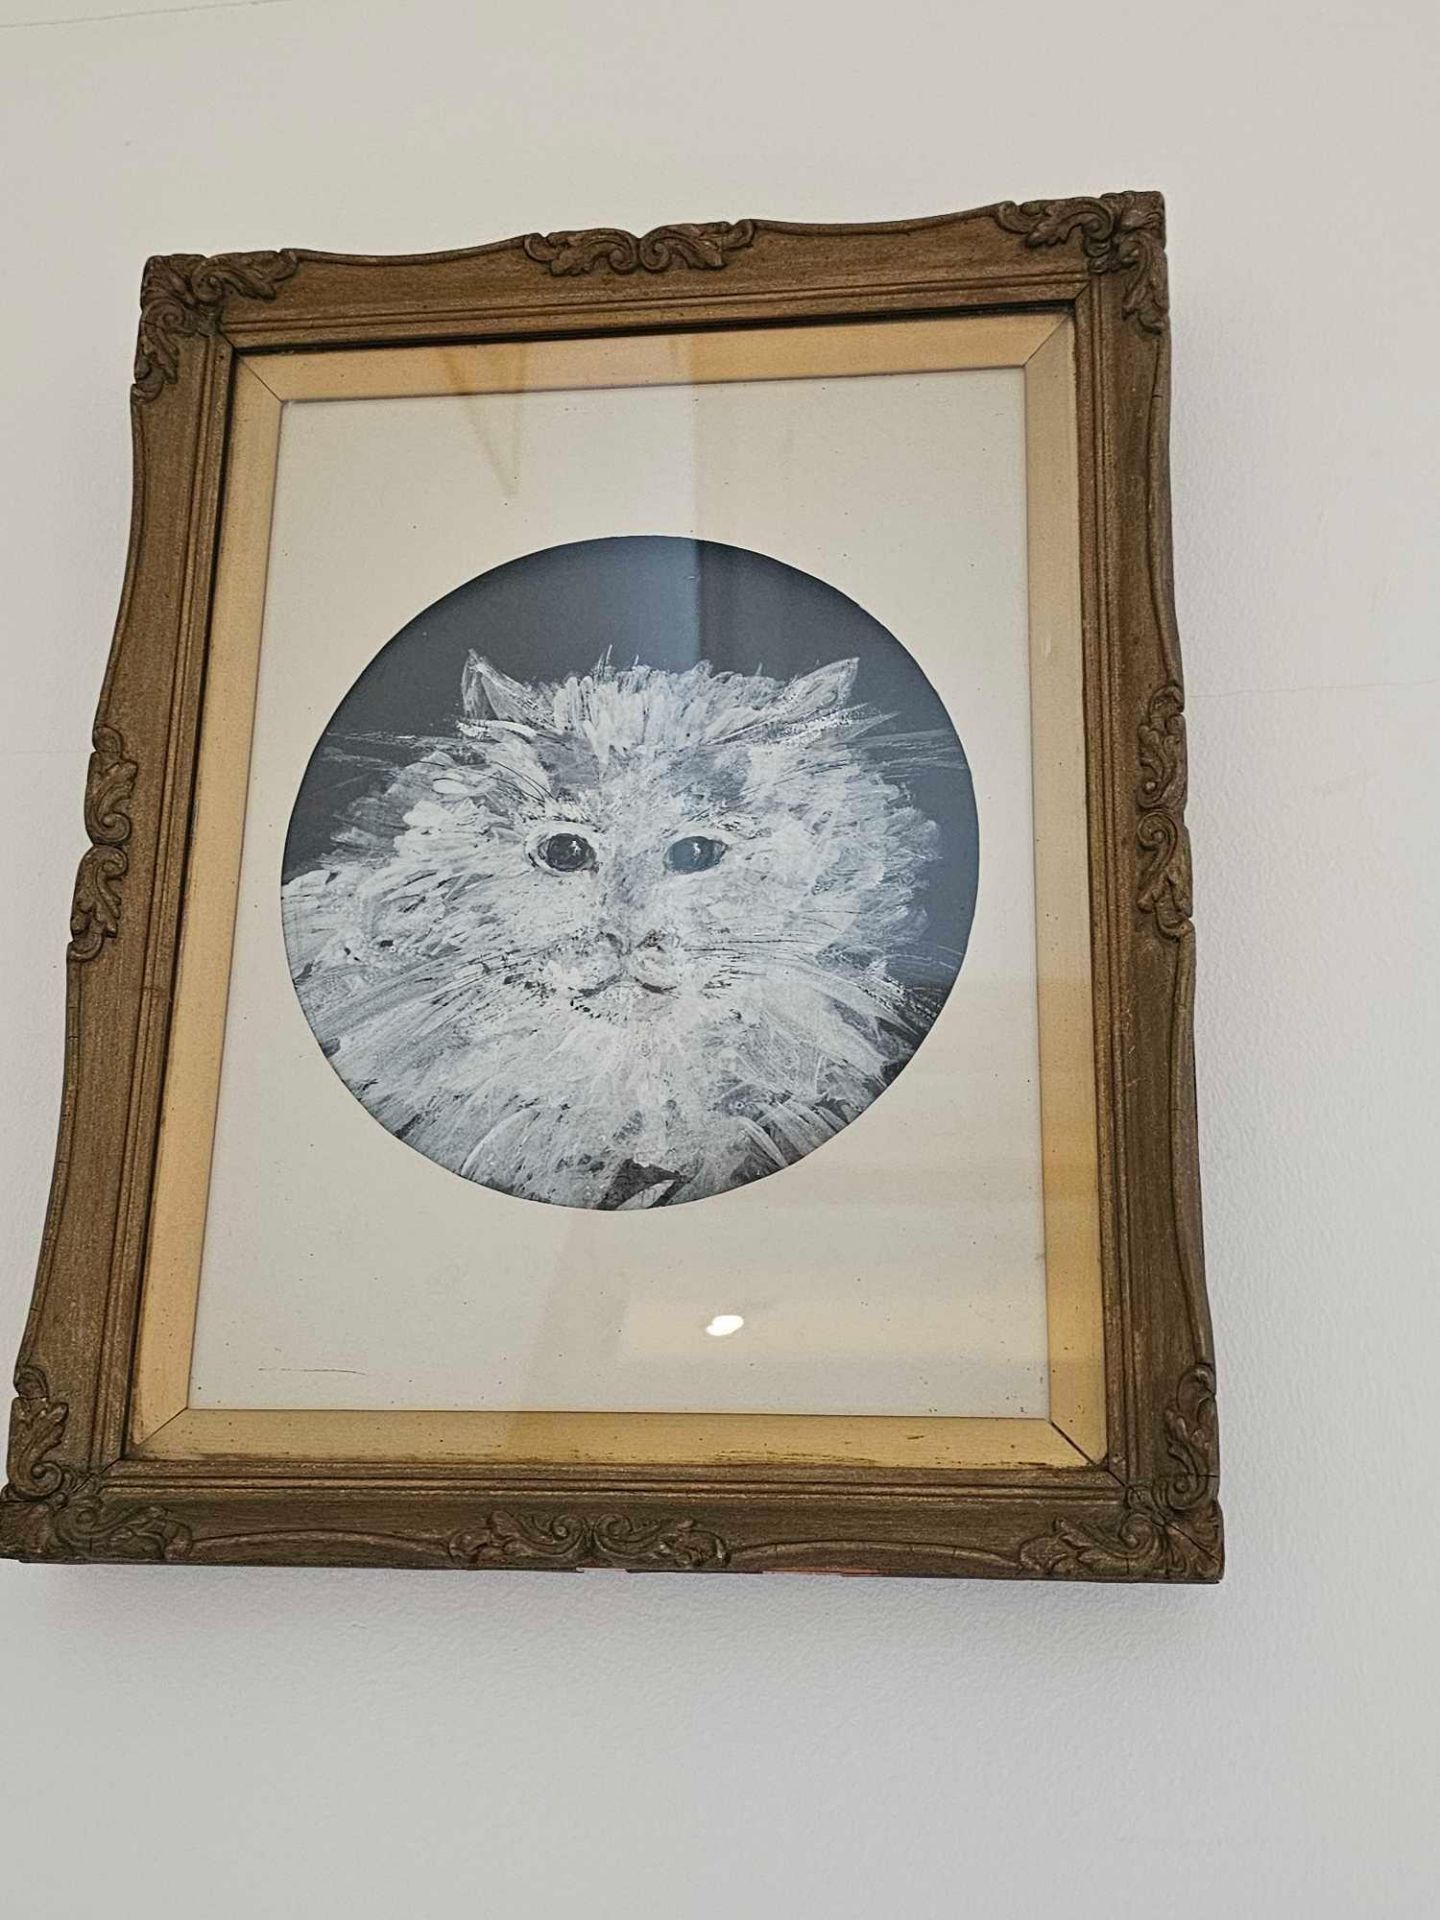 Framed Study Of A Cats Face Signed Artwork Joy Exley 1975 30 X 39cm - Image 2 of 2